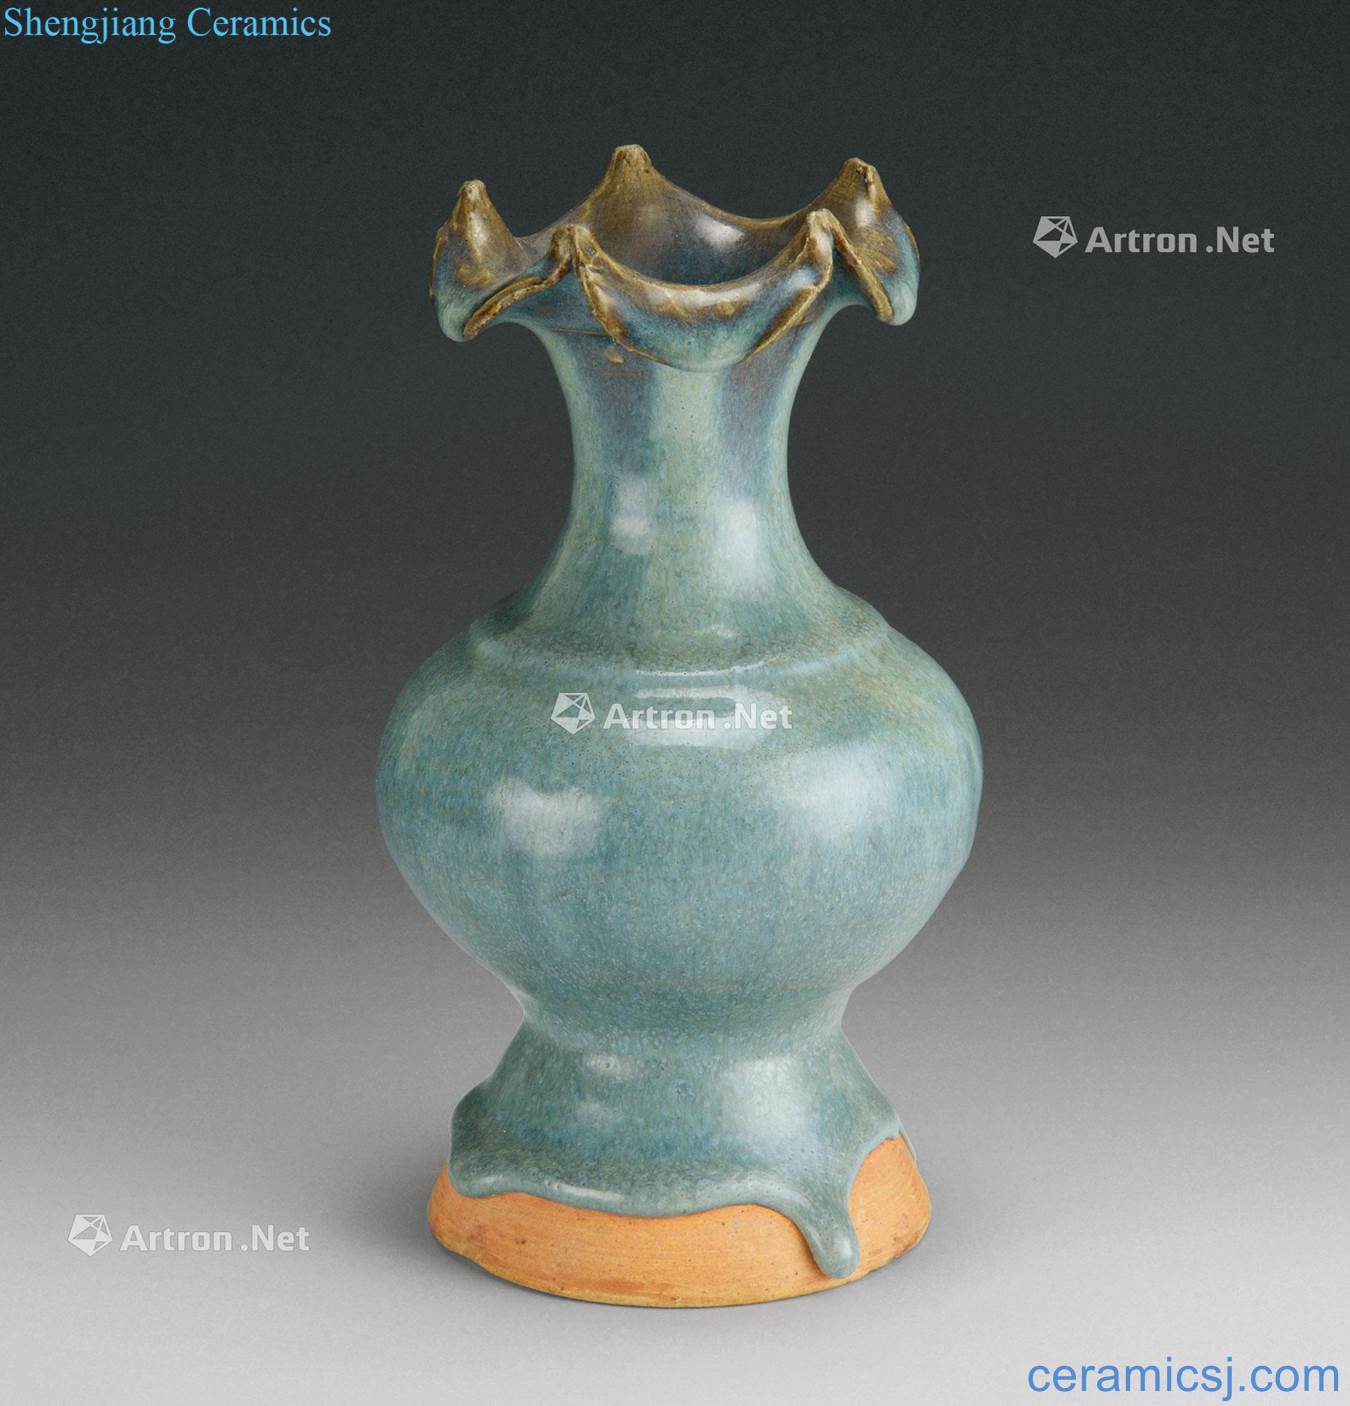 The yuan dynasty (1279-1368) flower bottle mouth masterpieces